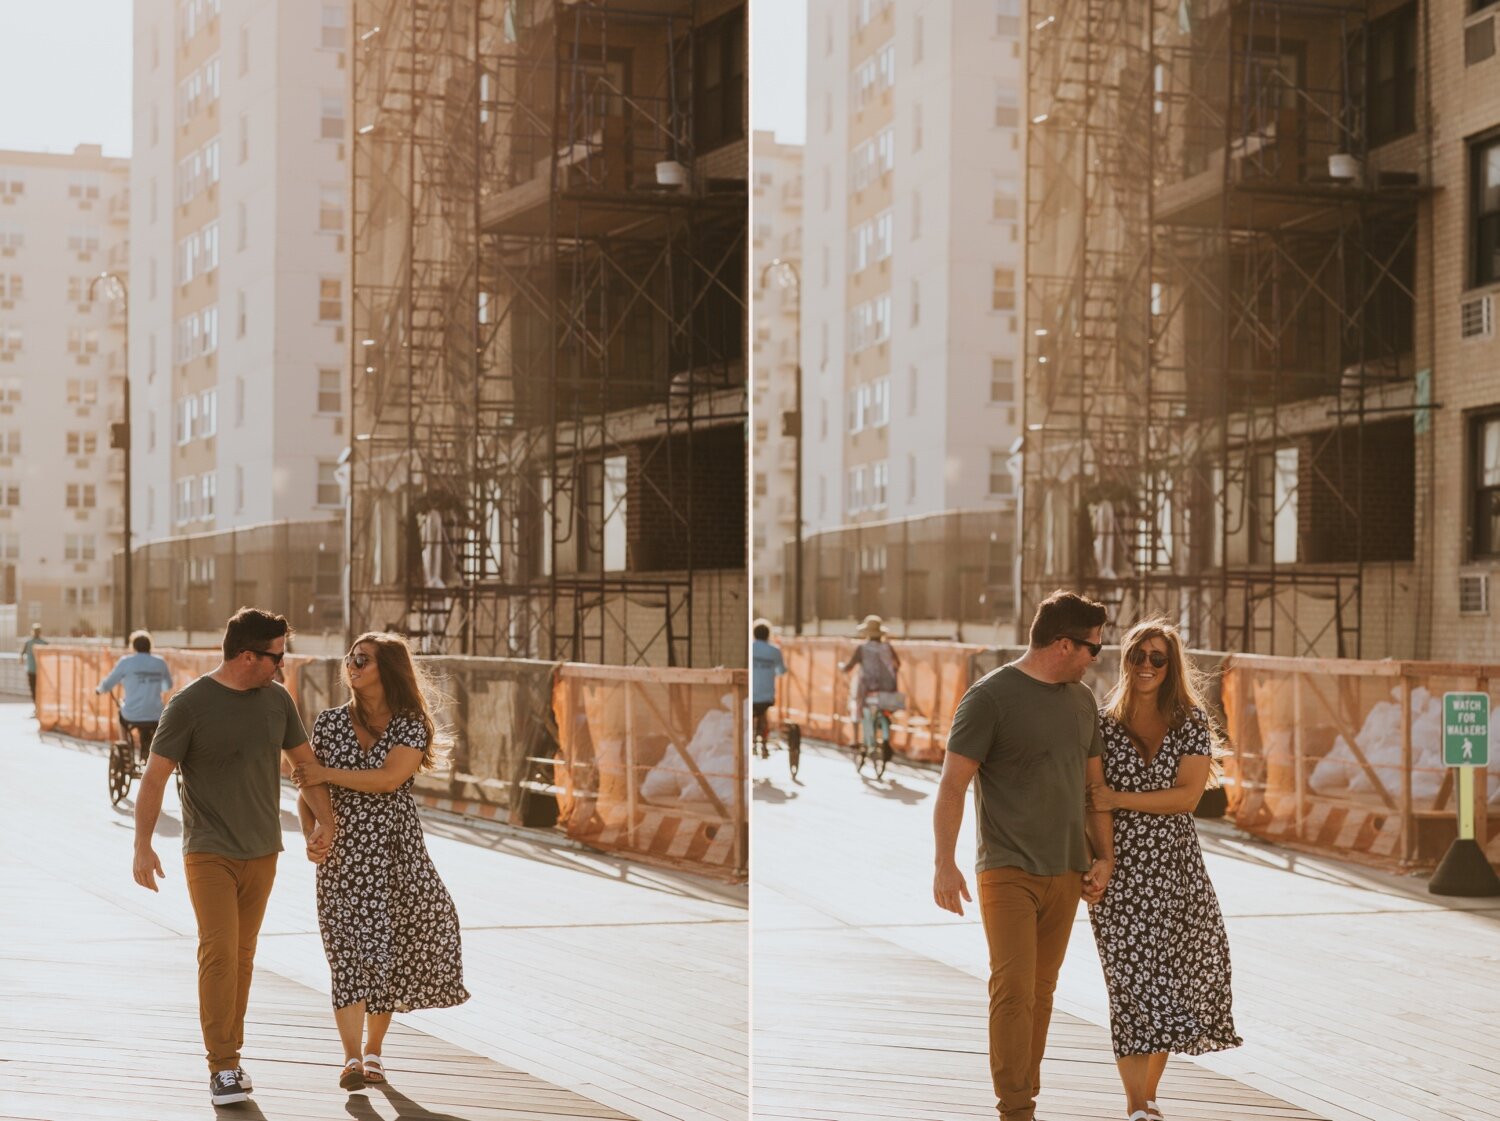 Hudson Valley Wedding Photographer, NYC Engagement Session, Long Island Engagement Session, Hudson Valley Engagement, Beach Engagement Session, Summer Engagement Session